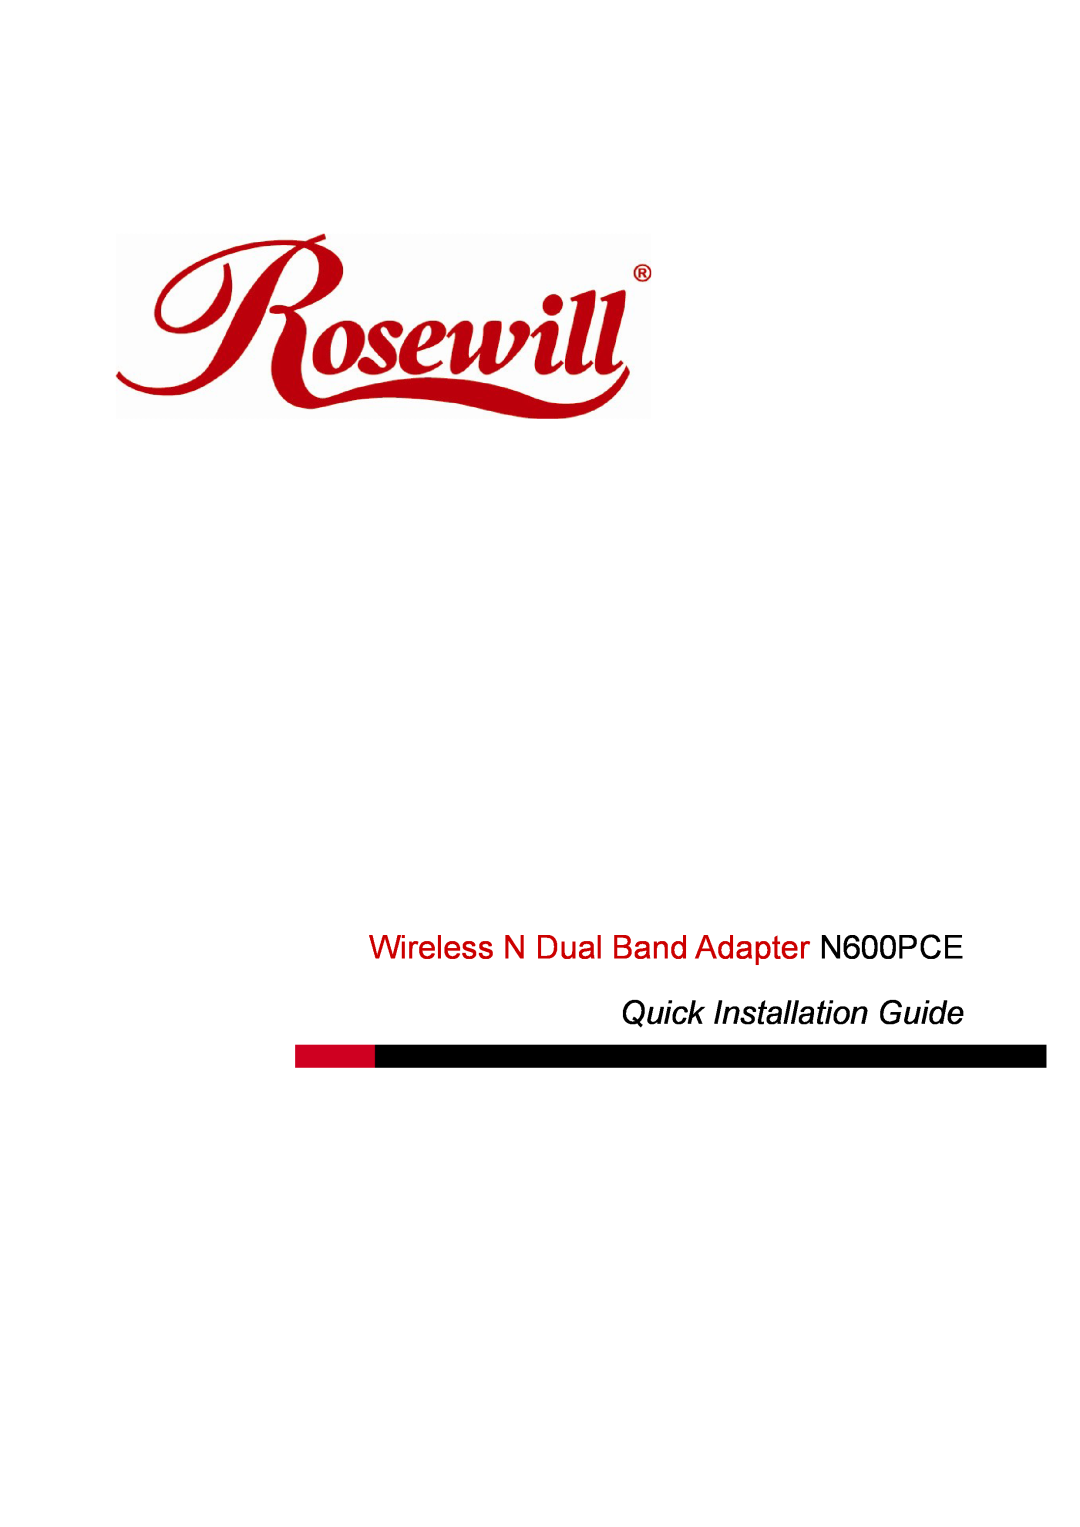 Rosewill manual Wireless N Dual Band Adapter N600PCE, Quick Installation Guide 